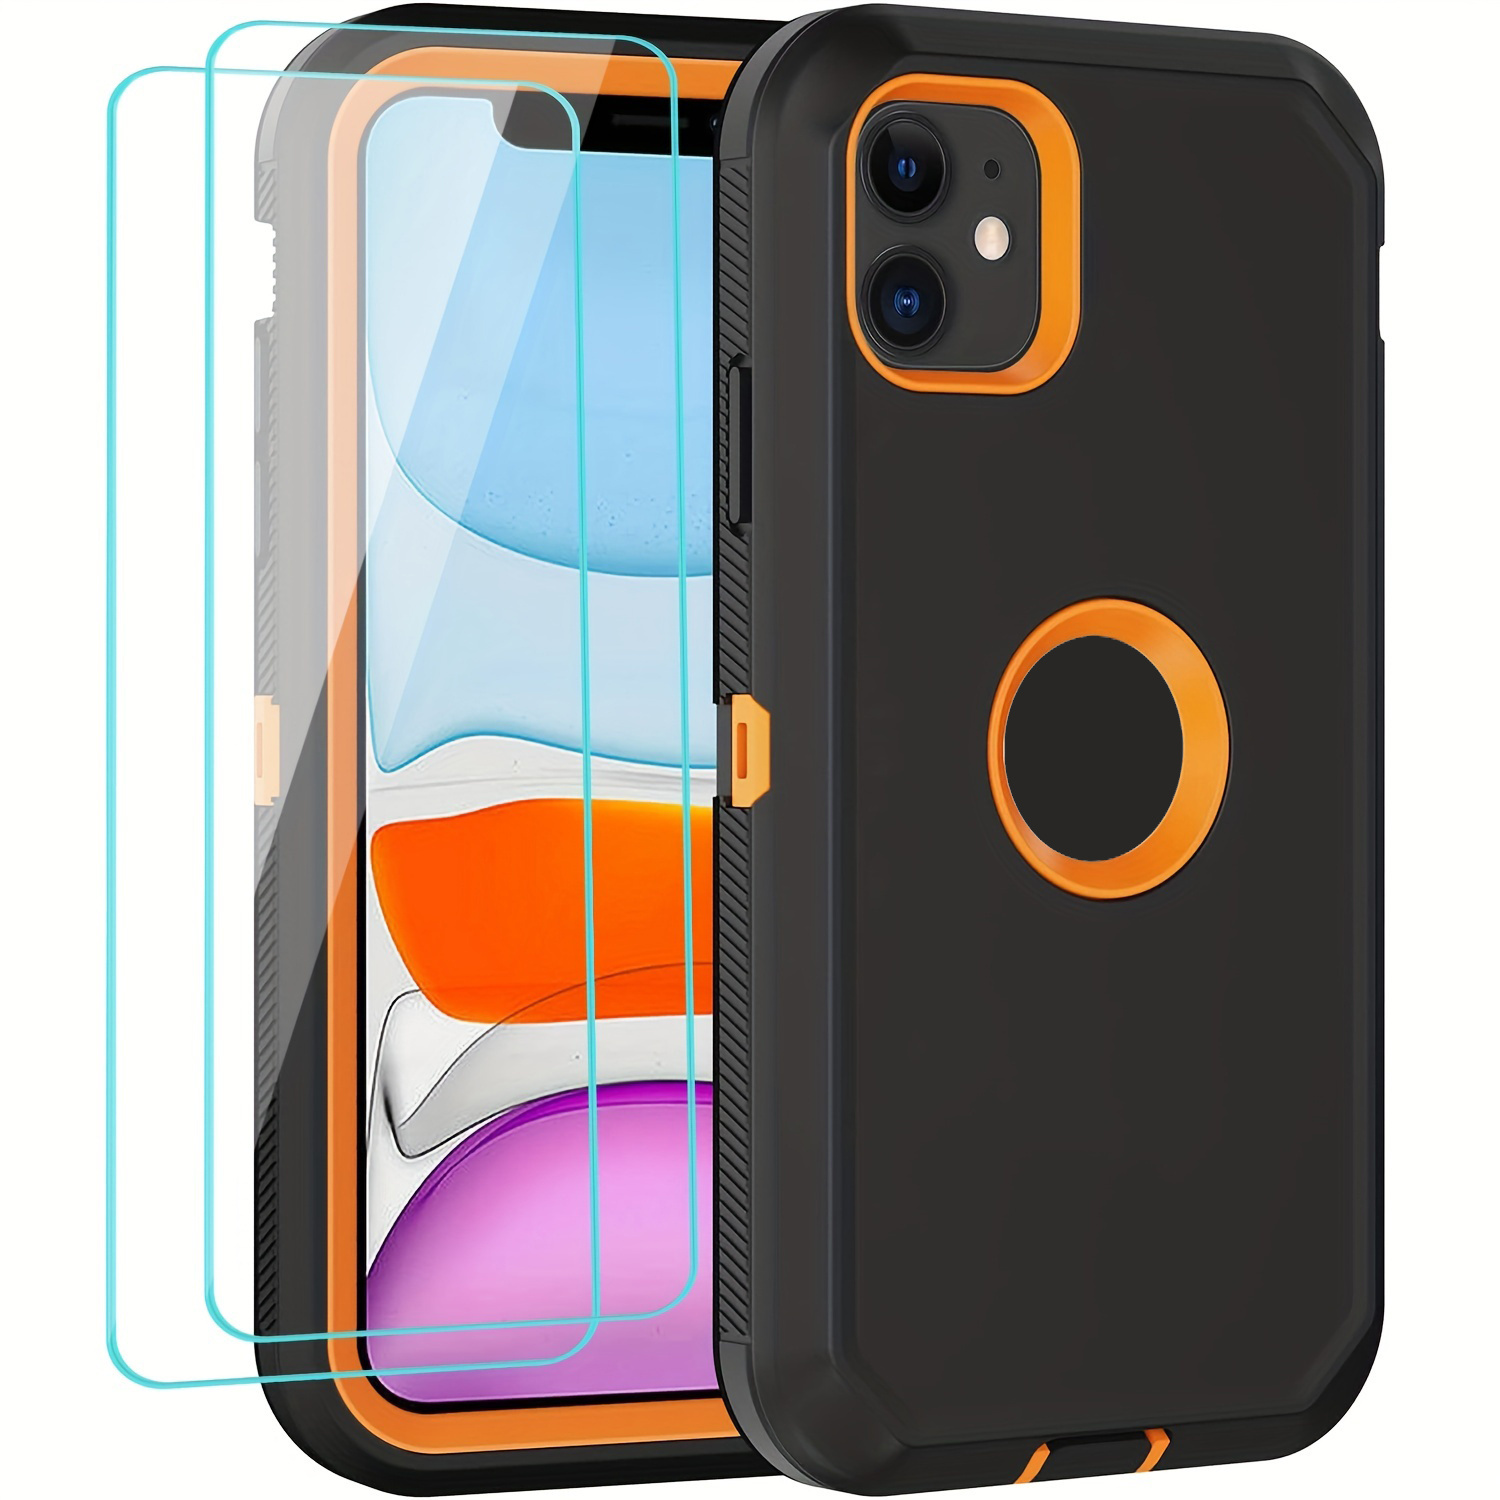 Screen protectors and cases, iPhone 11